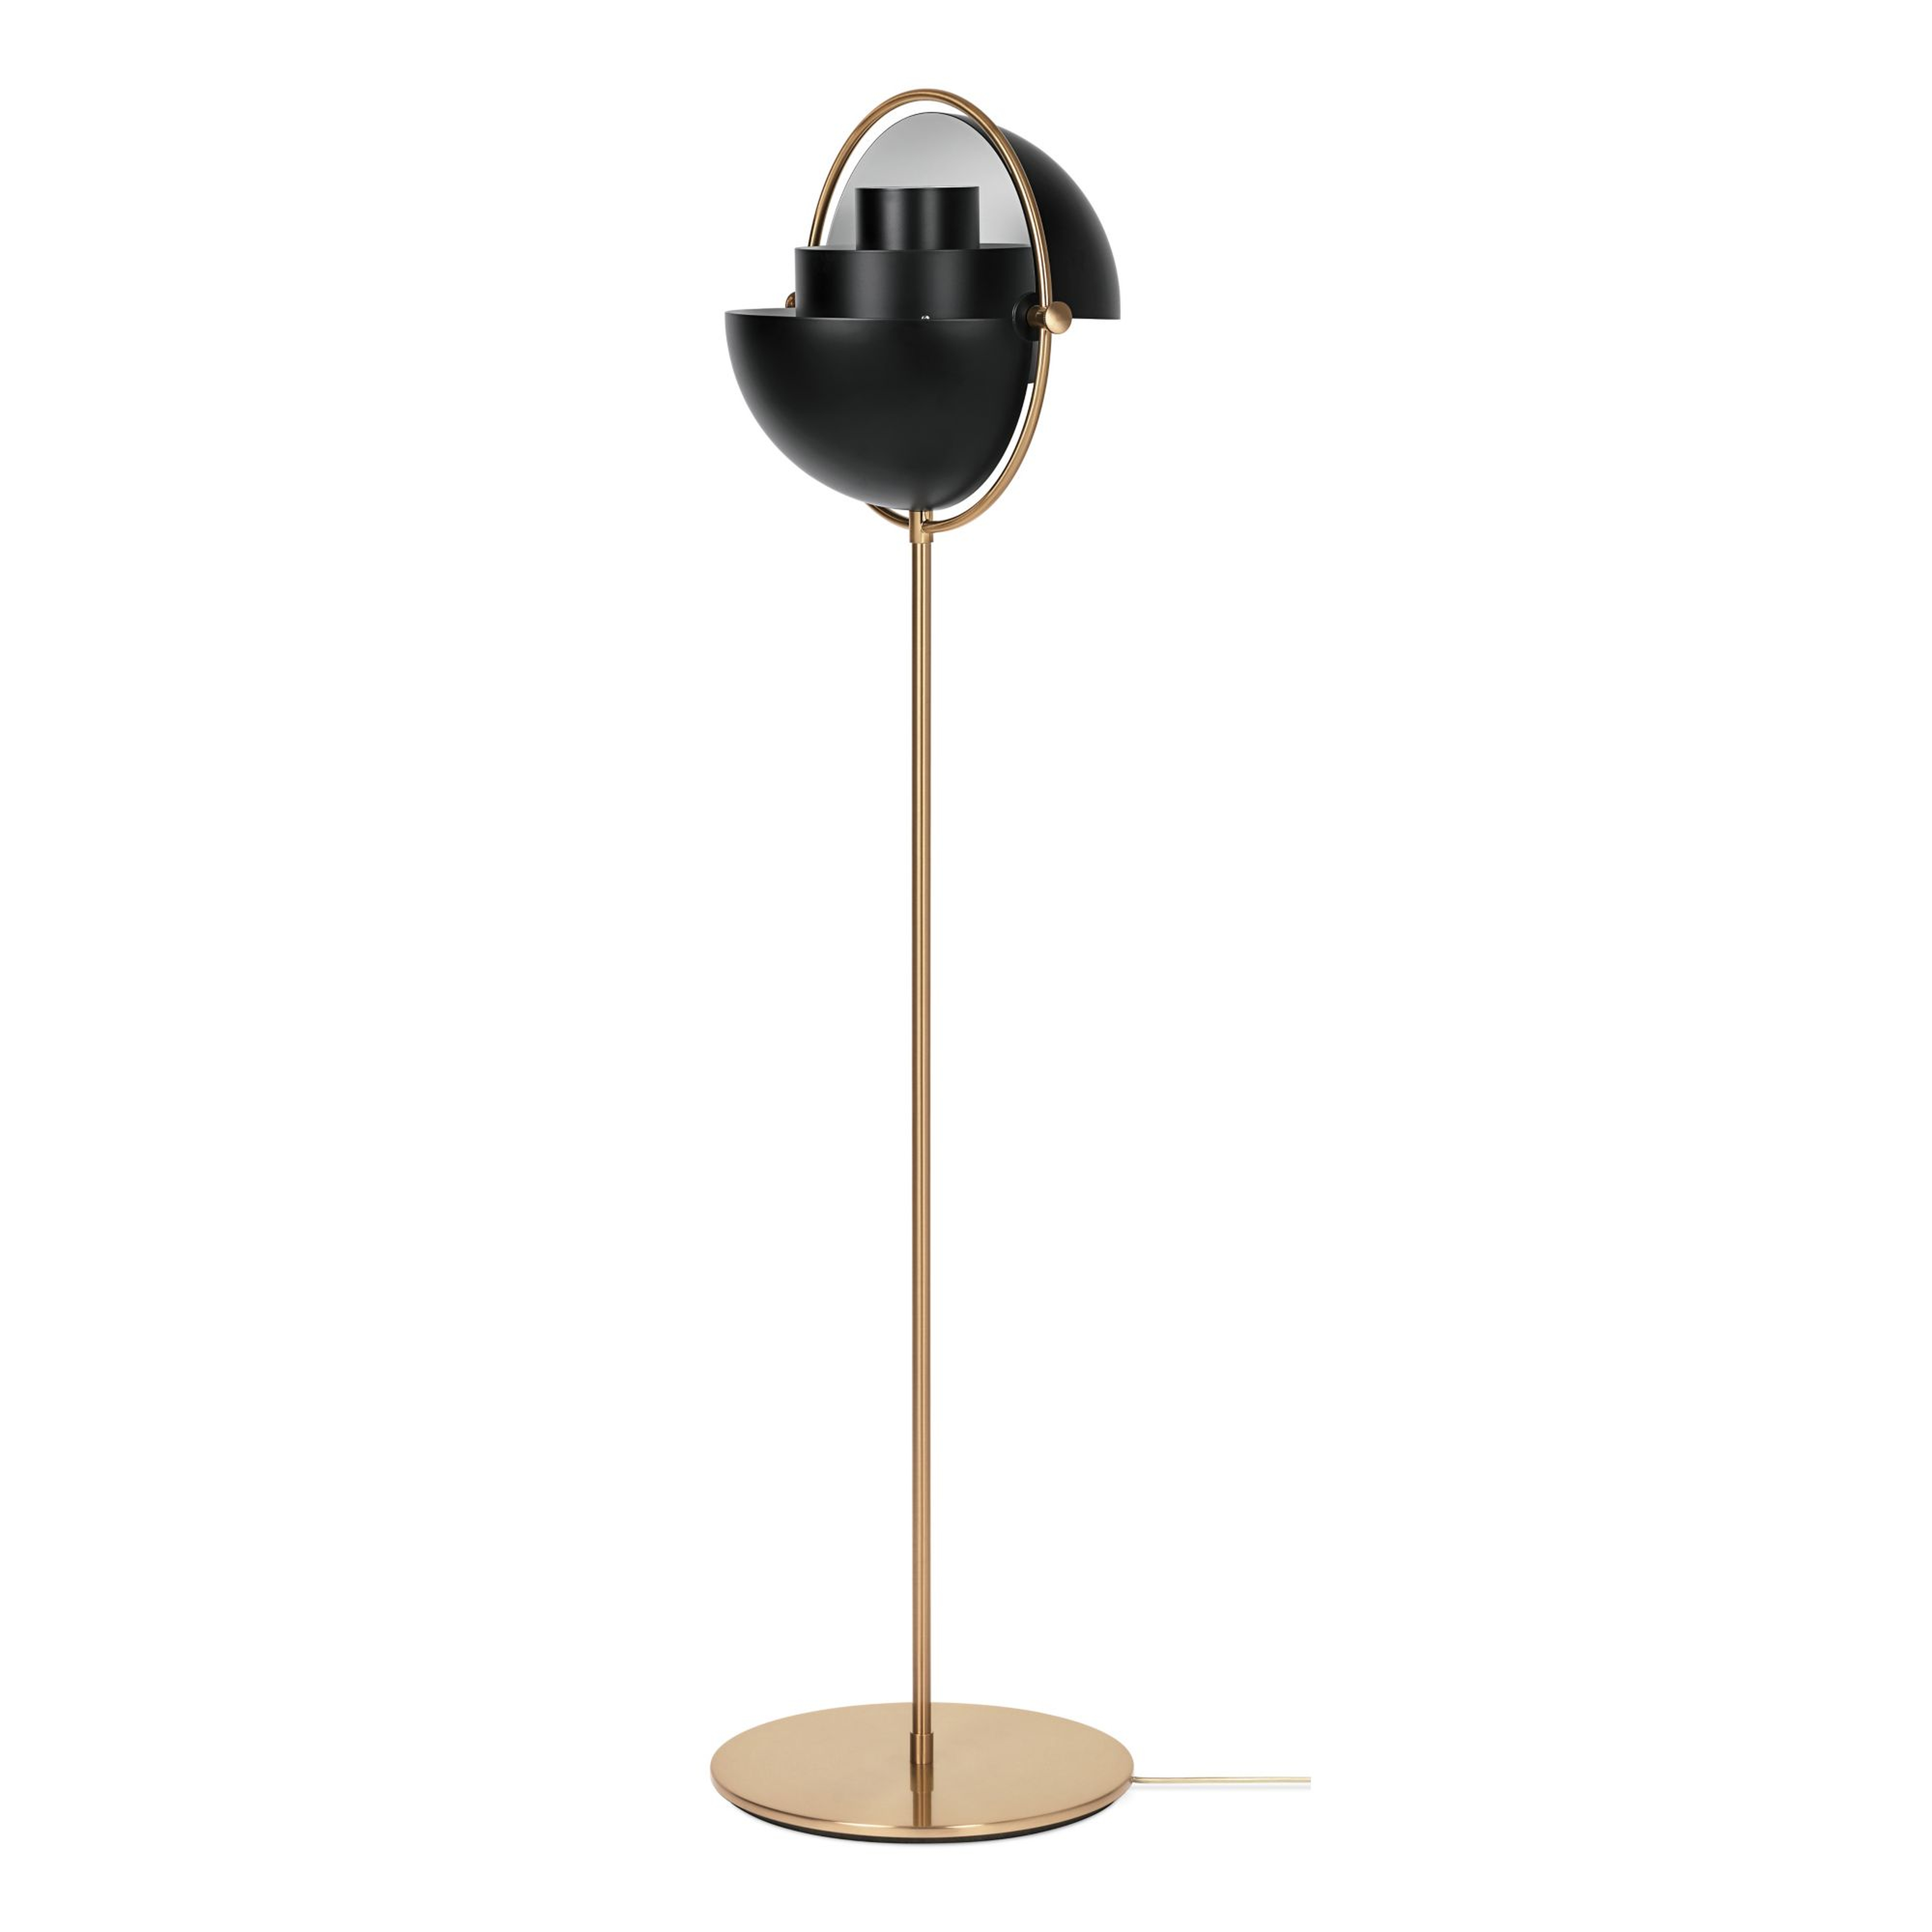 Multi-Lite Floor Lamp Designed by Louis Weisdorf, produced by Gubi - Design Within Reach